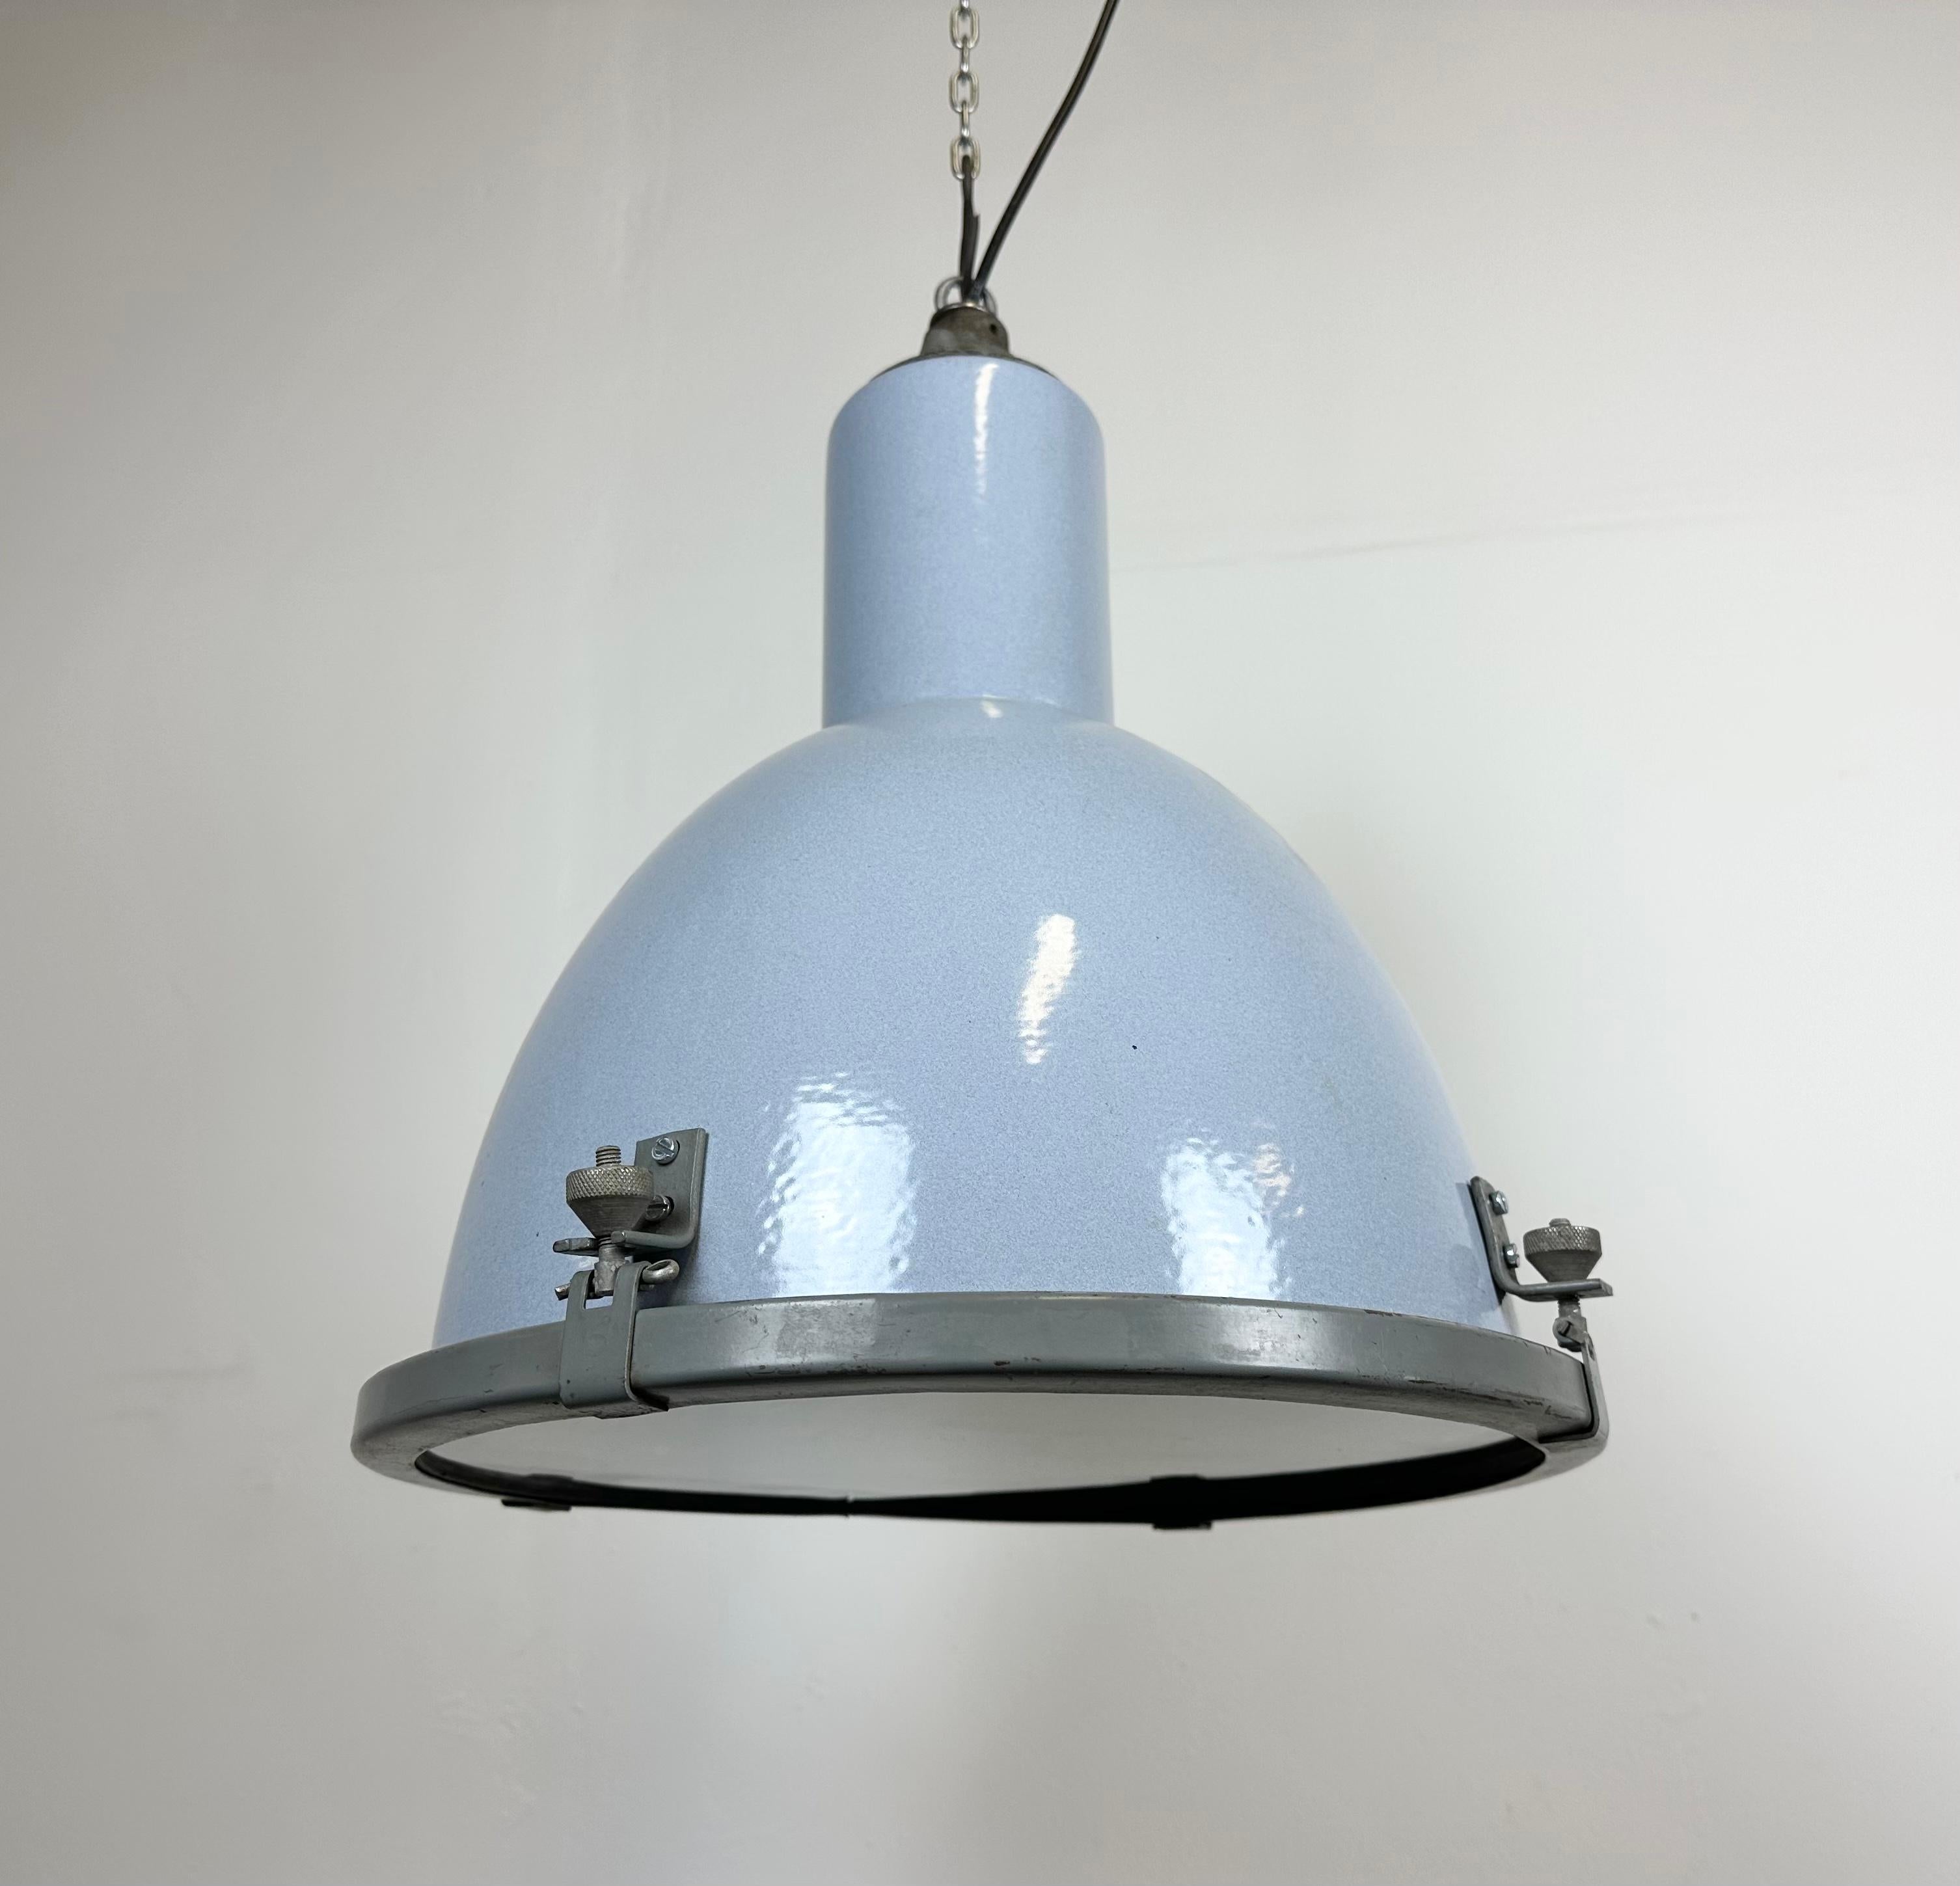 Bauhaus Grey Enamel Industrial Pendant Lamp with Glass Cover, 1950s For Sale 5